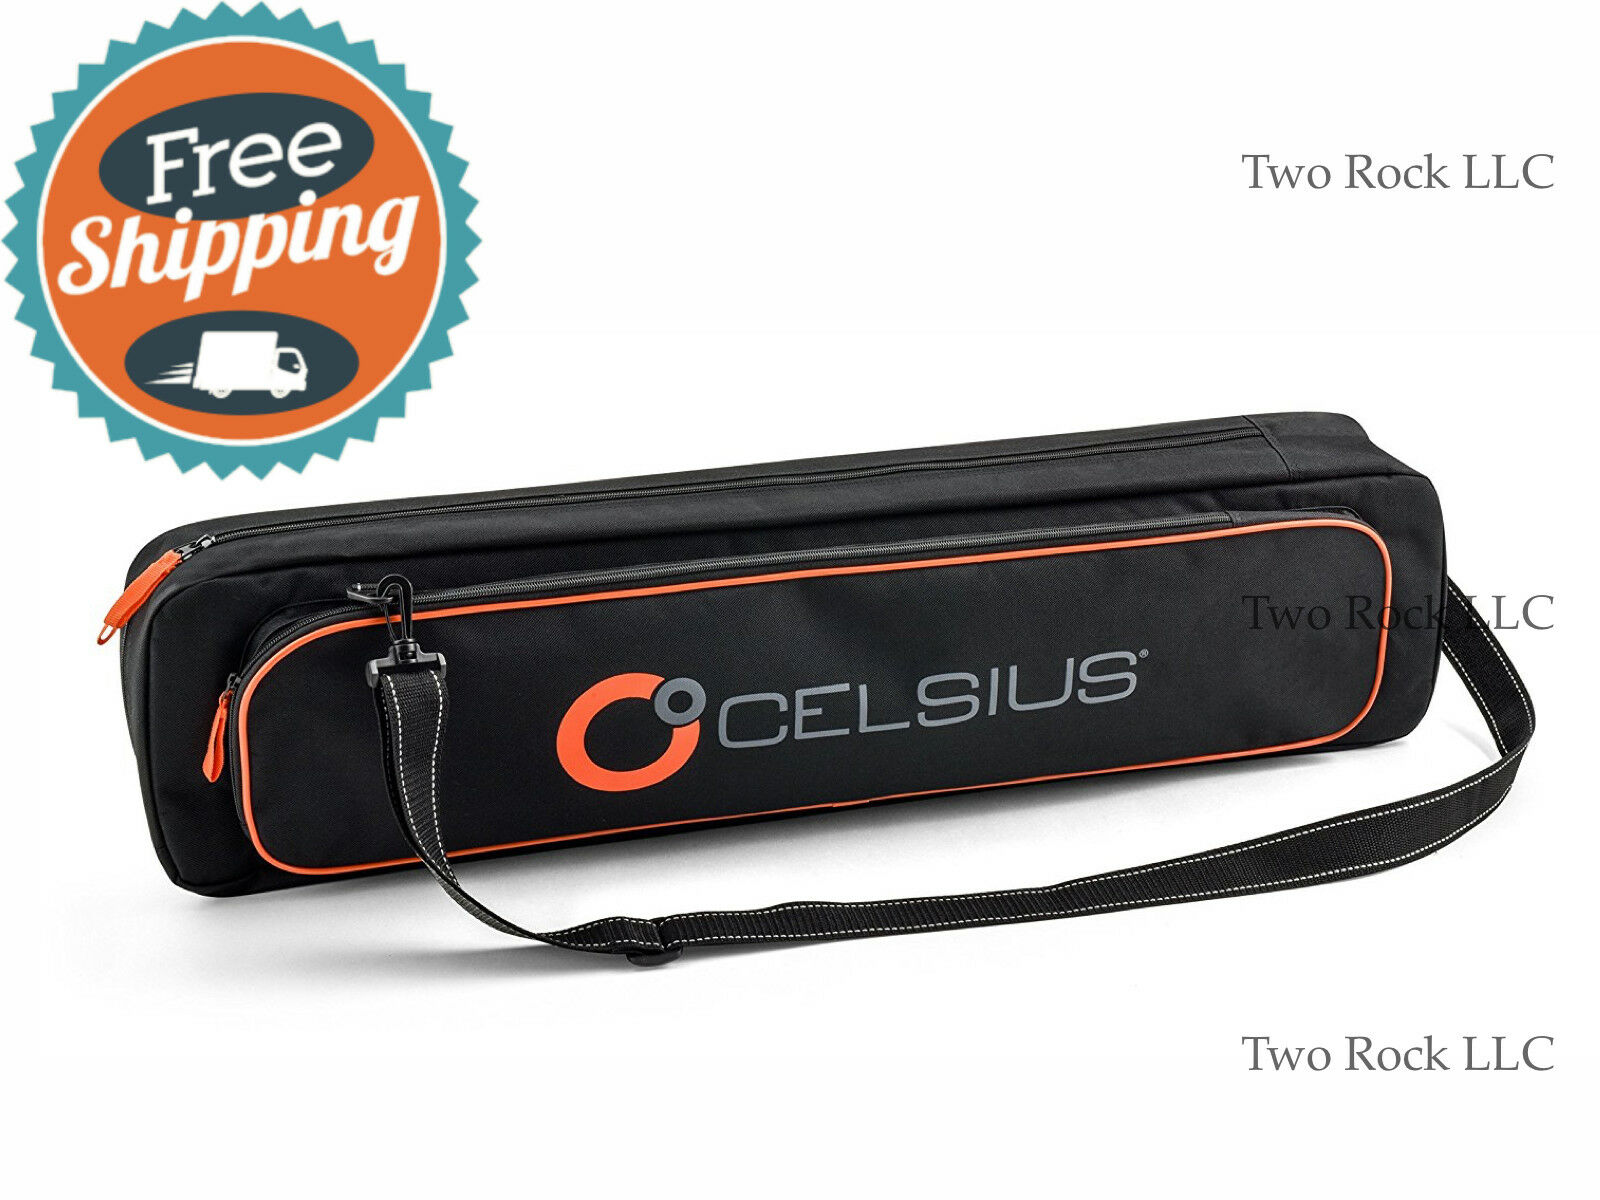 Celsius - Ice Fishing Rod Case Holds Up To 30" Poles Or Tip-ups - Storage Locker